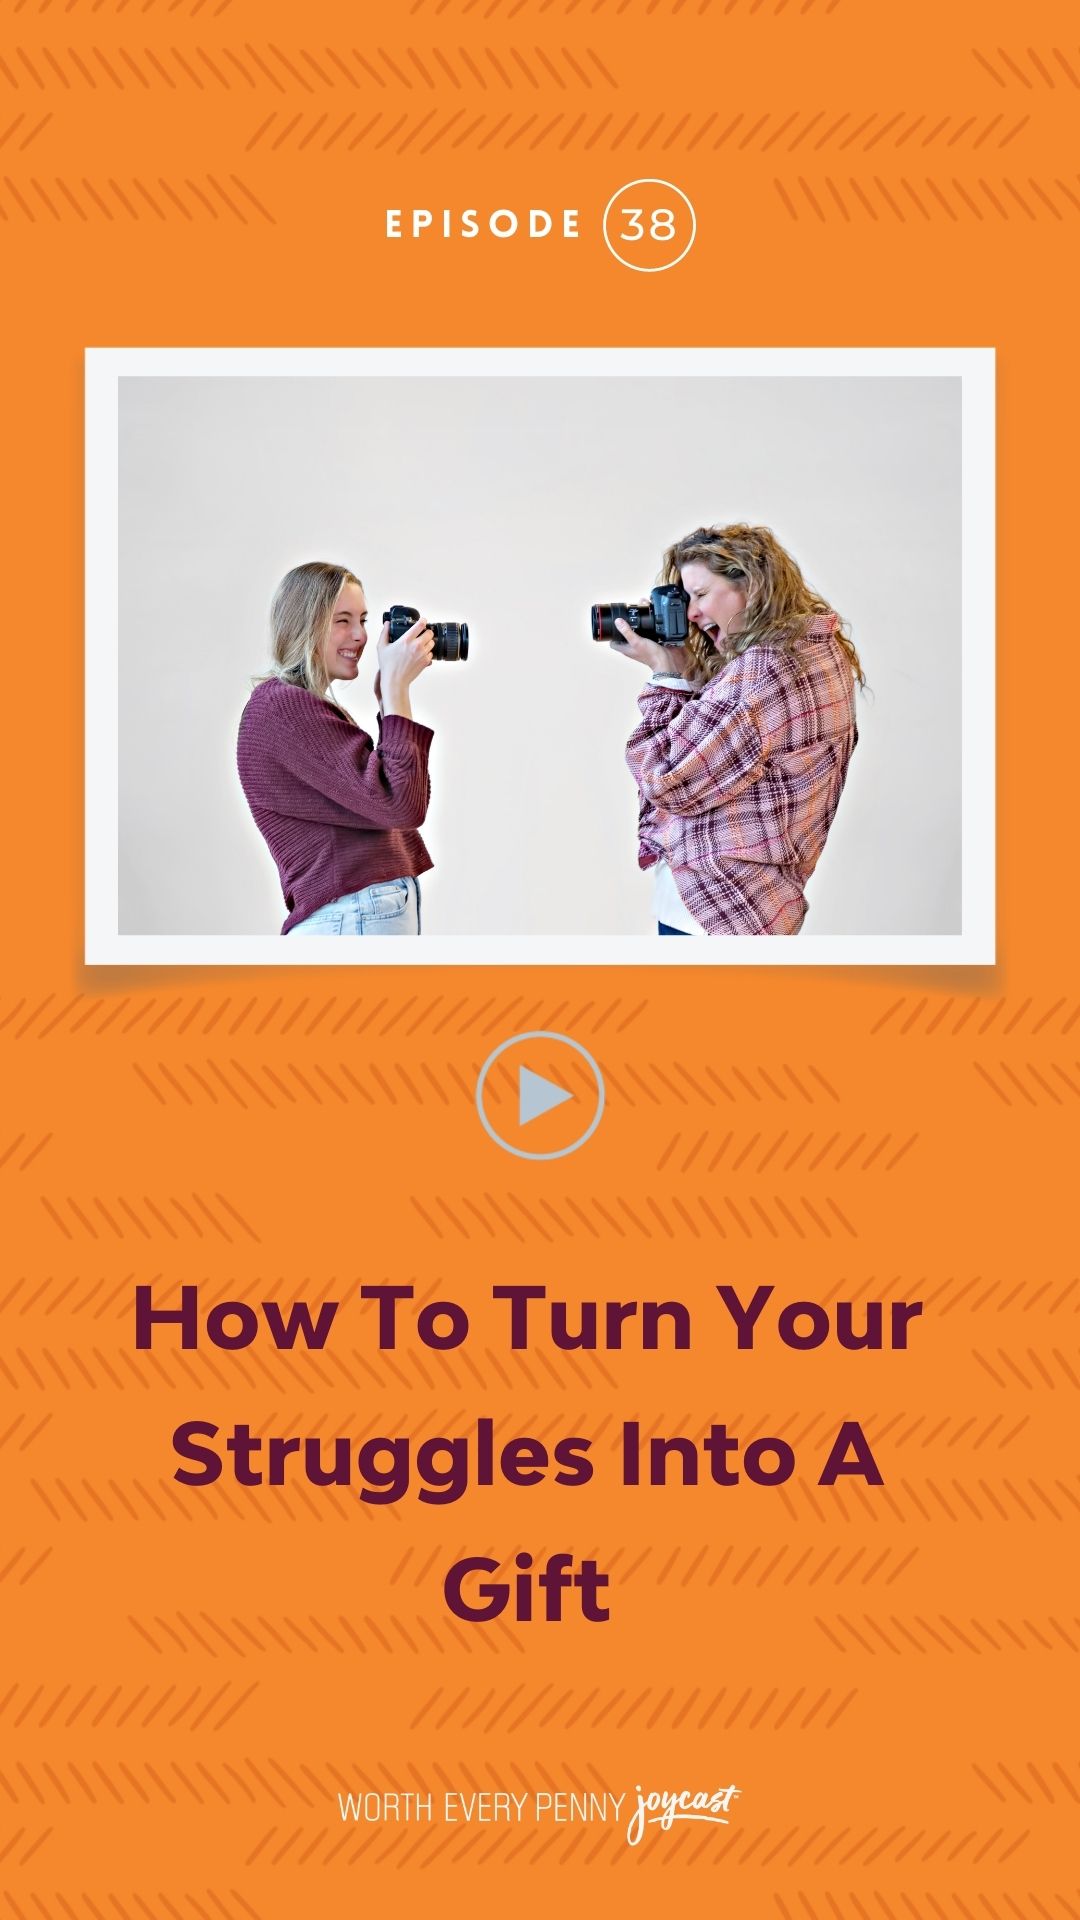 Episode 38: How to Turn Your Struggles Into a Gift